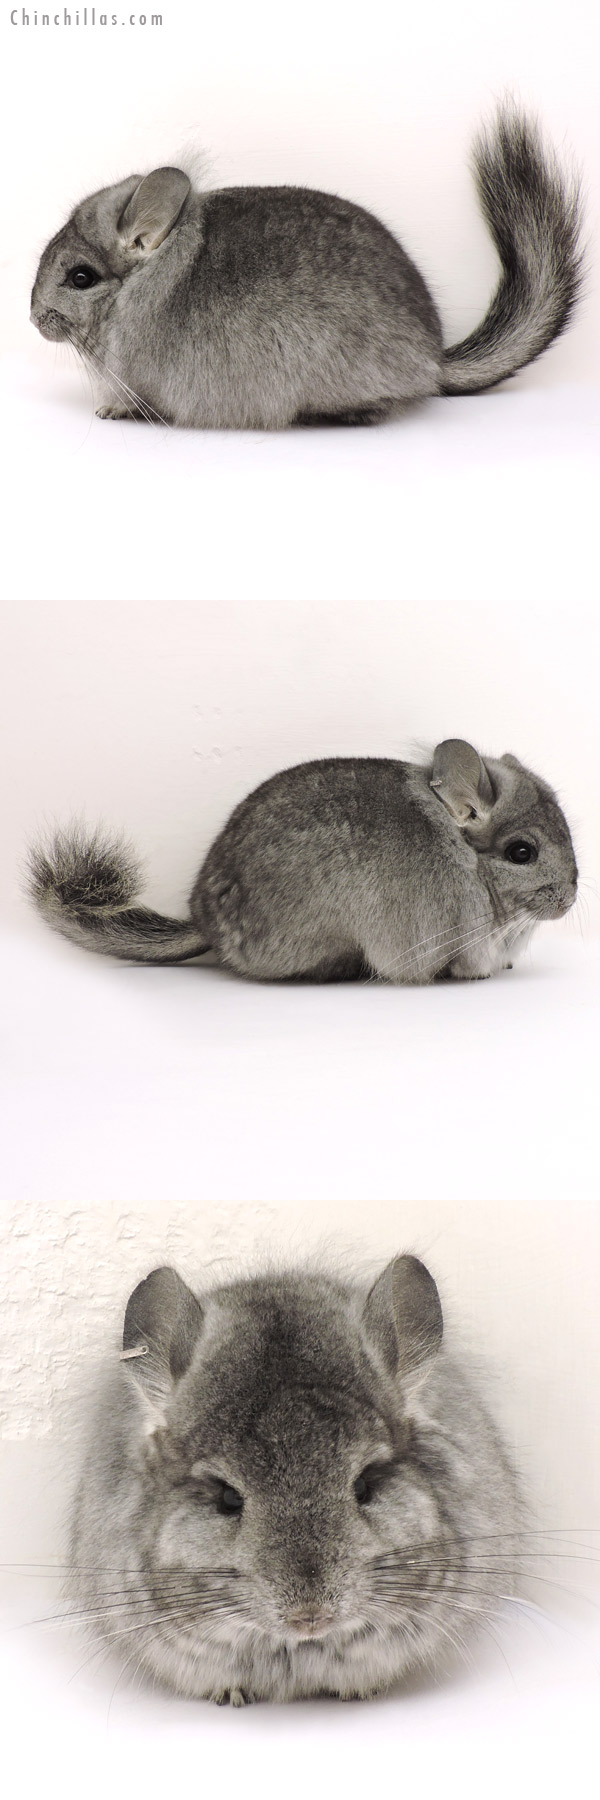 Chinchilla or related item offered for sale or export on Chinchillas.com - 14176 Standard  Royal Persian Angora Female Chinchilla with Lion Mane